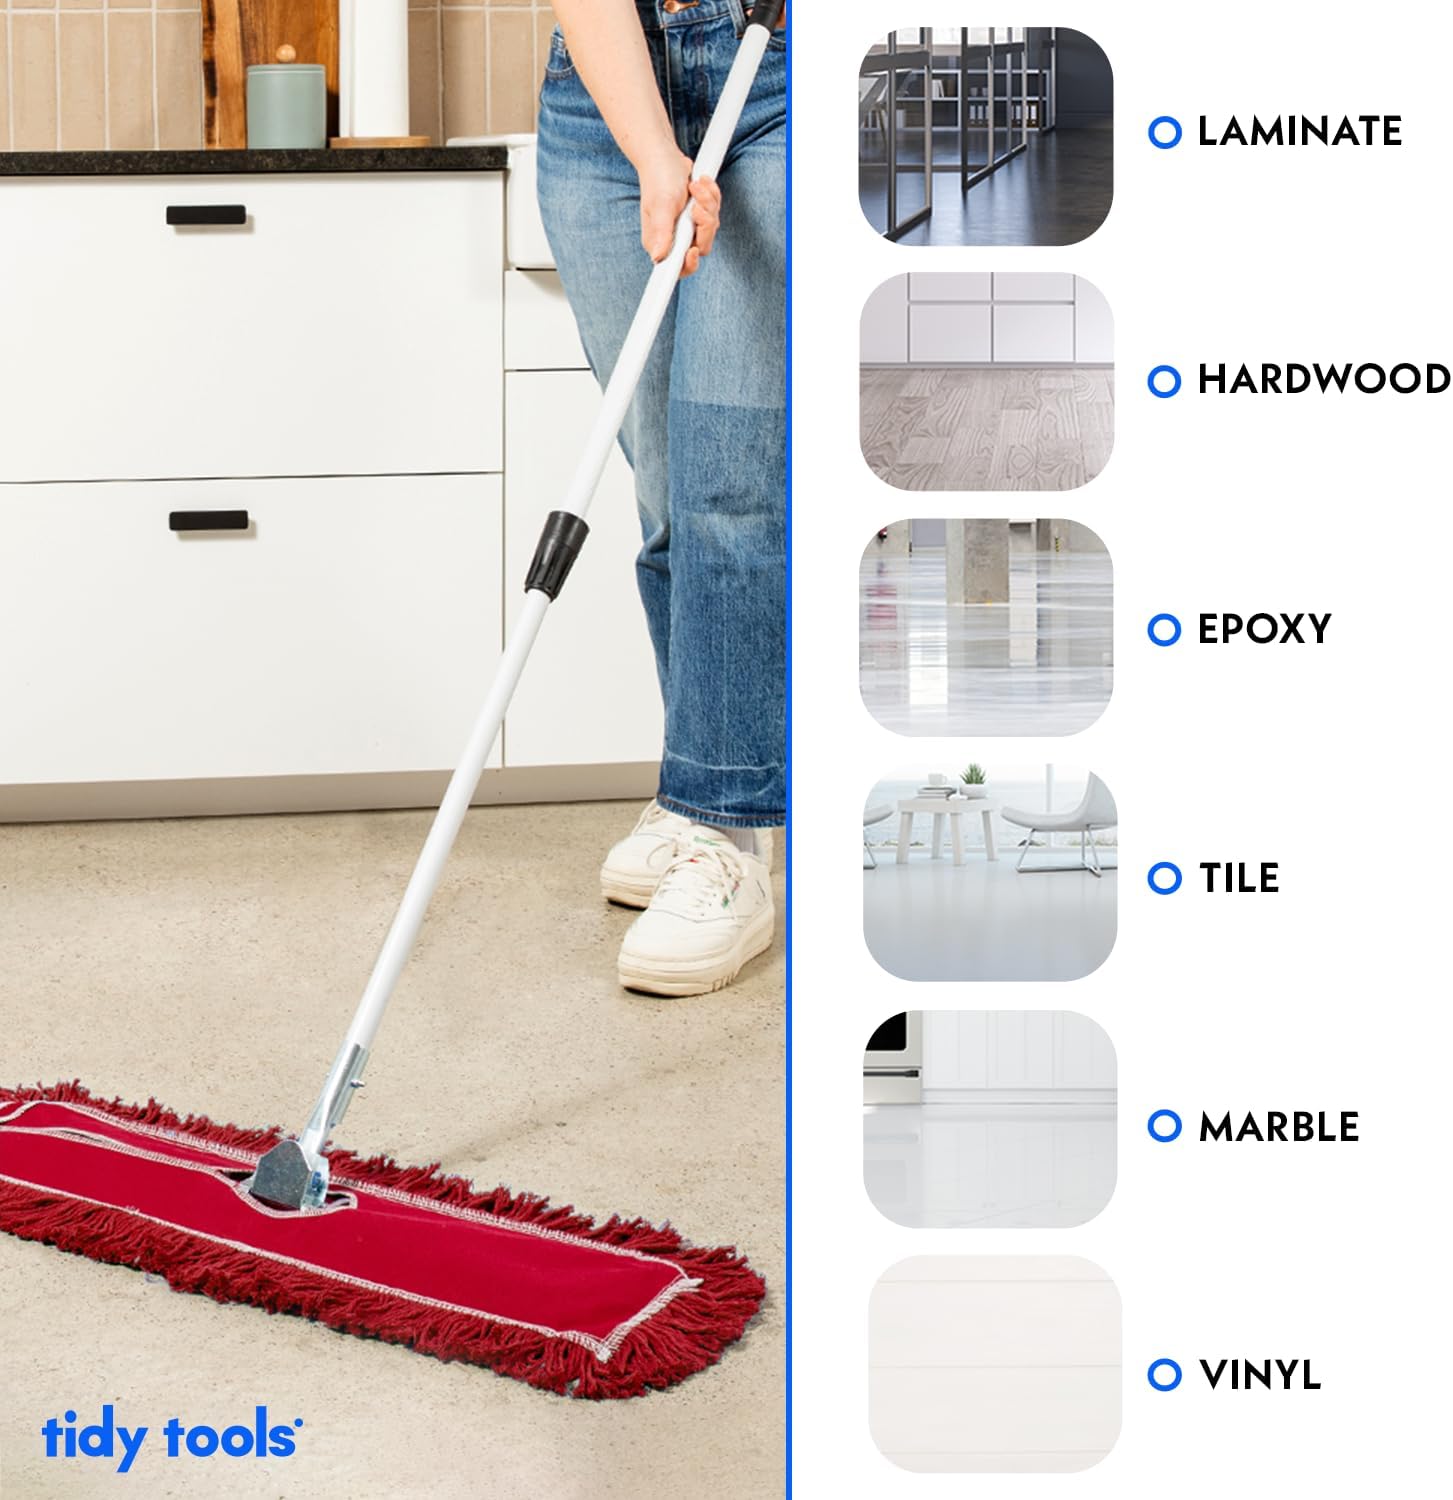 Tidy Tools 36 inch Dust Mop Kit Extendable Handle, Red